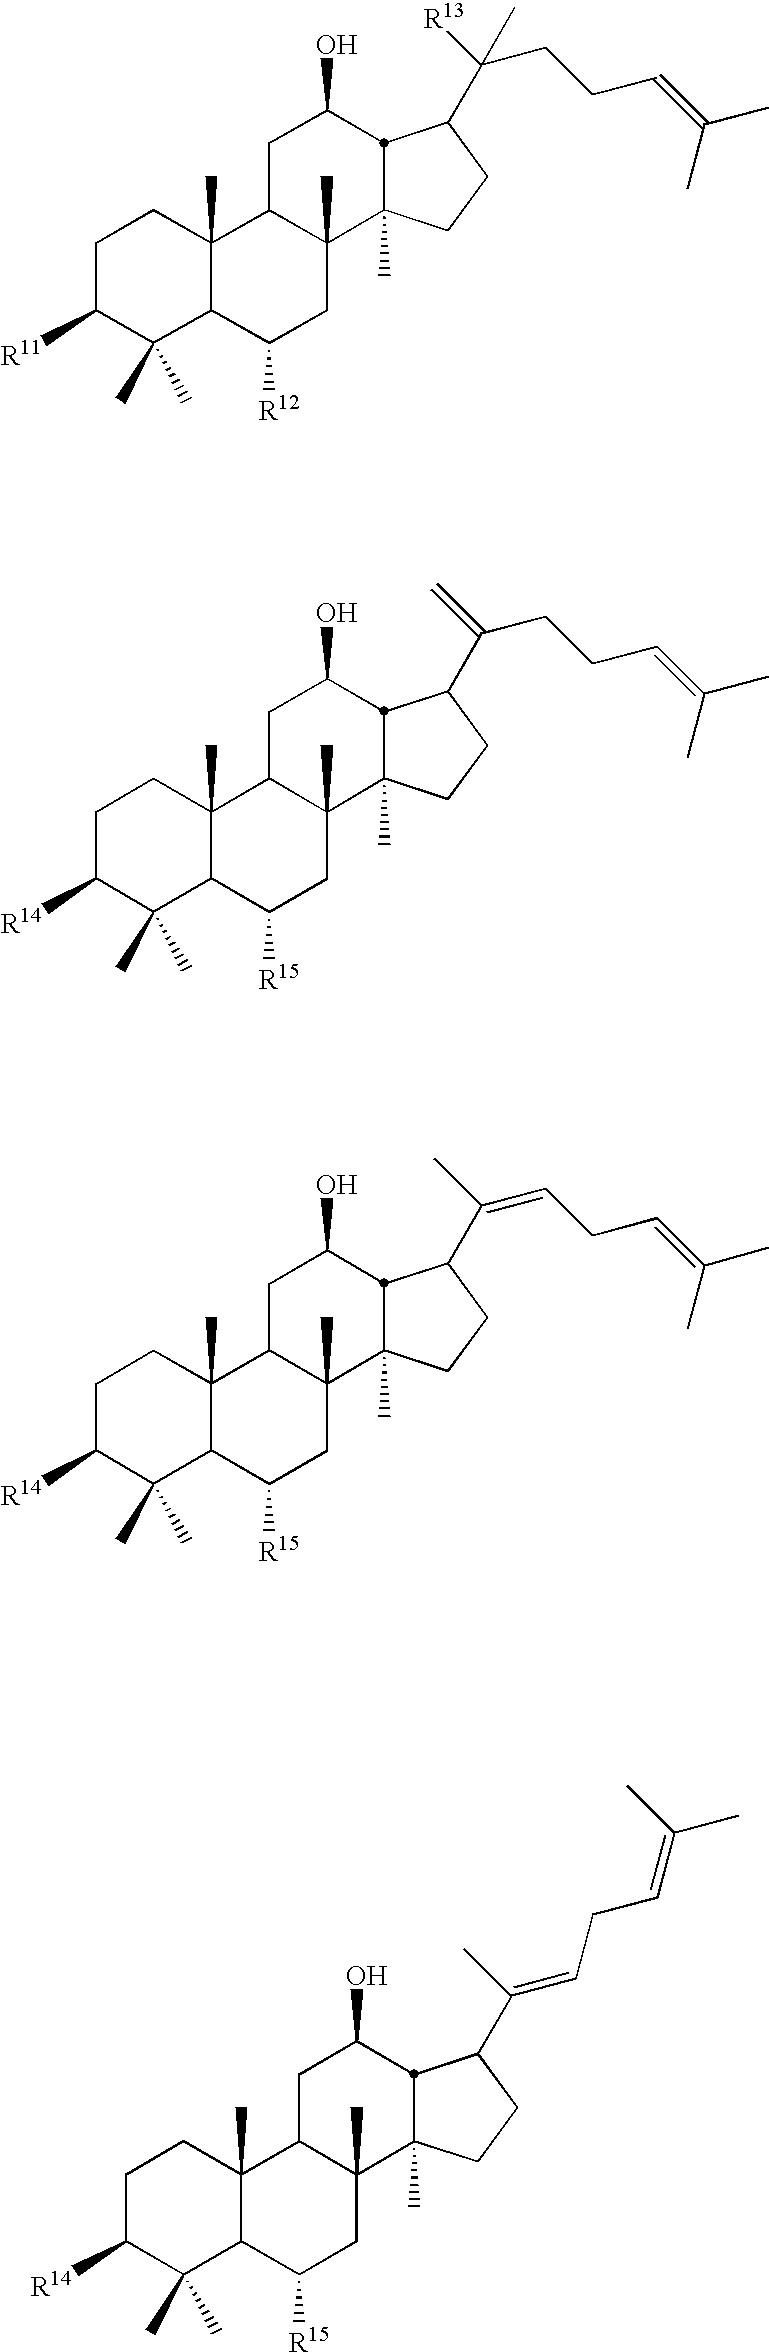 Dicarboxylic acid ester derivatives of ginsenoside, pharmaceutical preparations containing the same, and preparation thereof